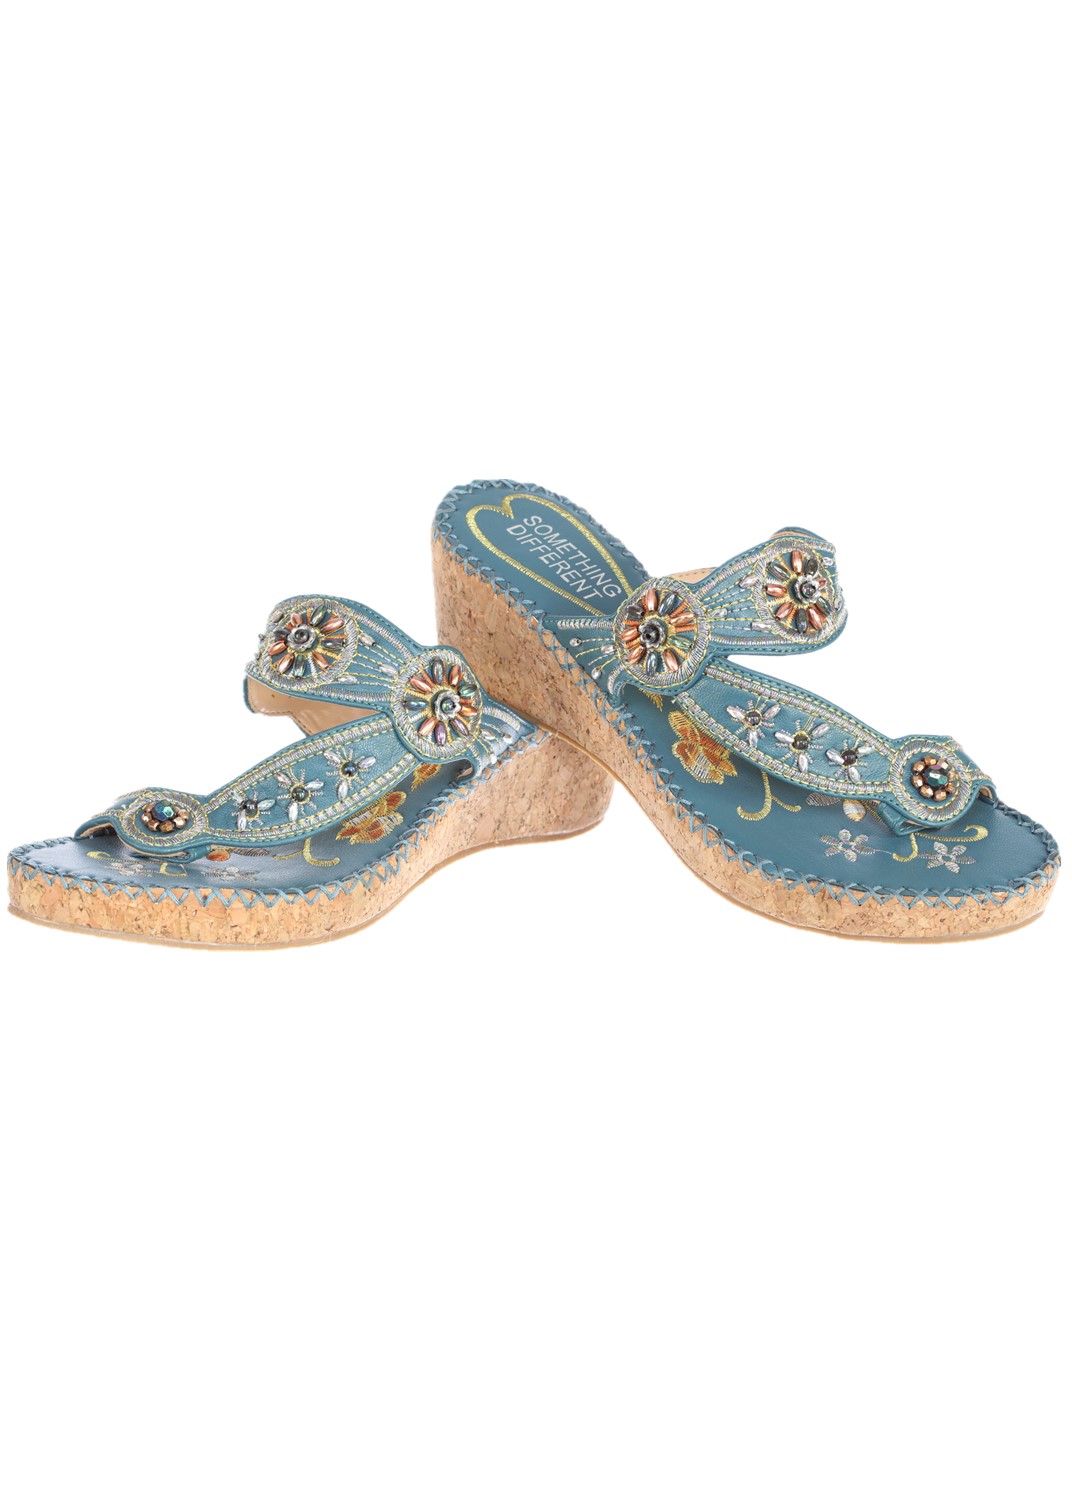 Women's Casual Embroided Beaded Wedge Sandals-Blue-7 - image 3 of 3